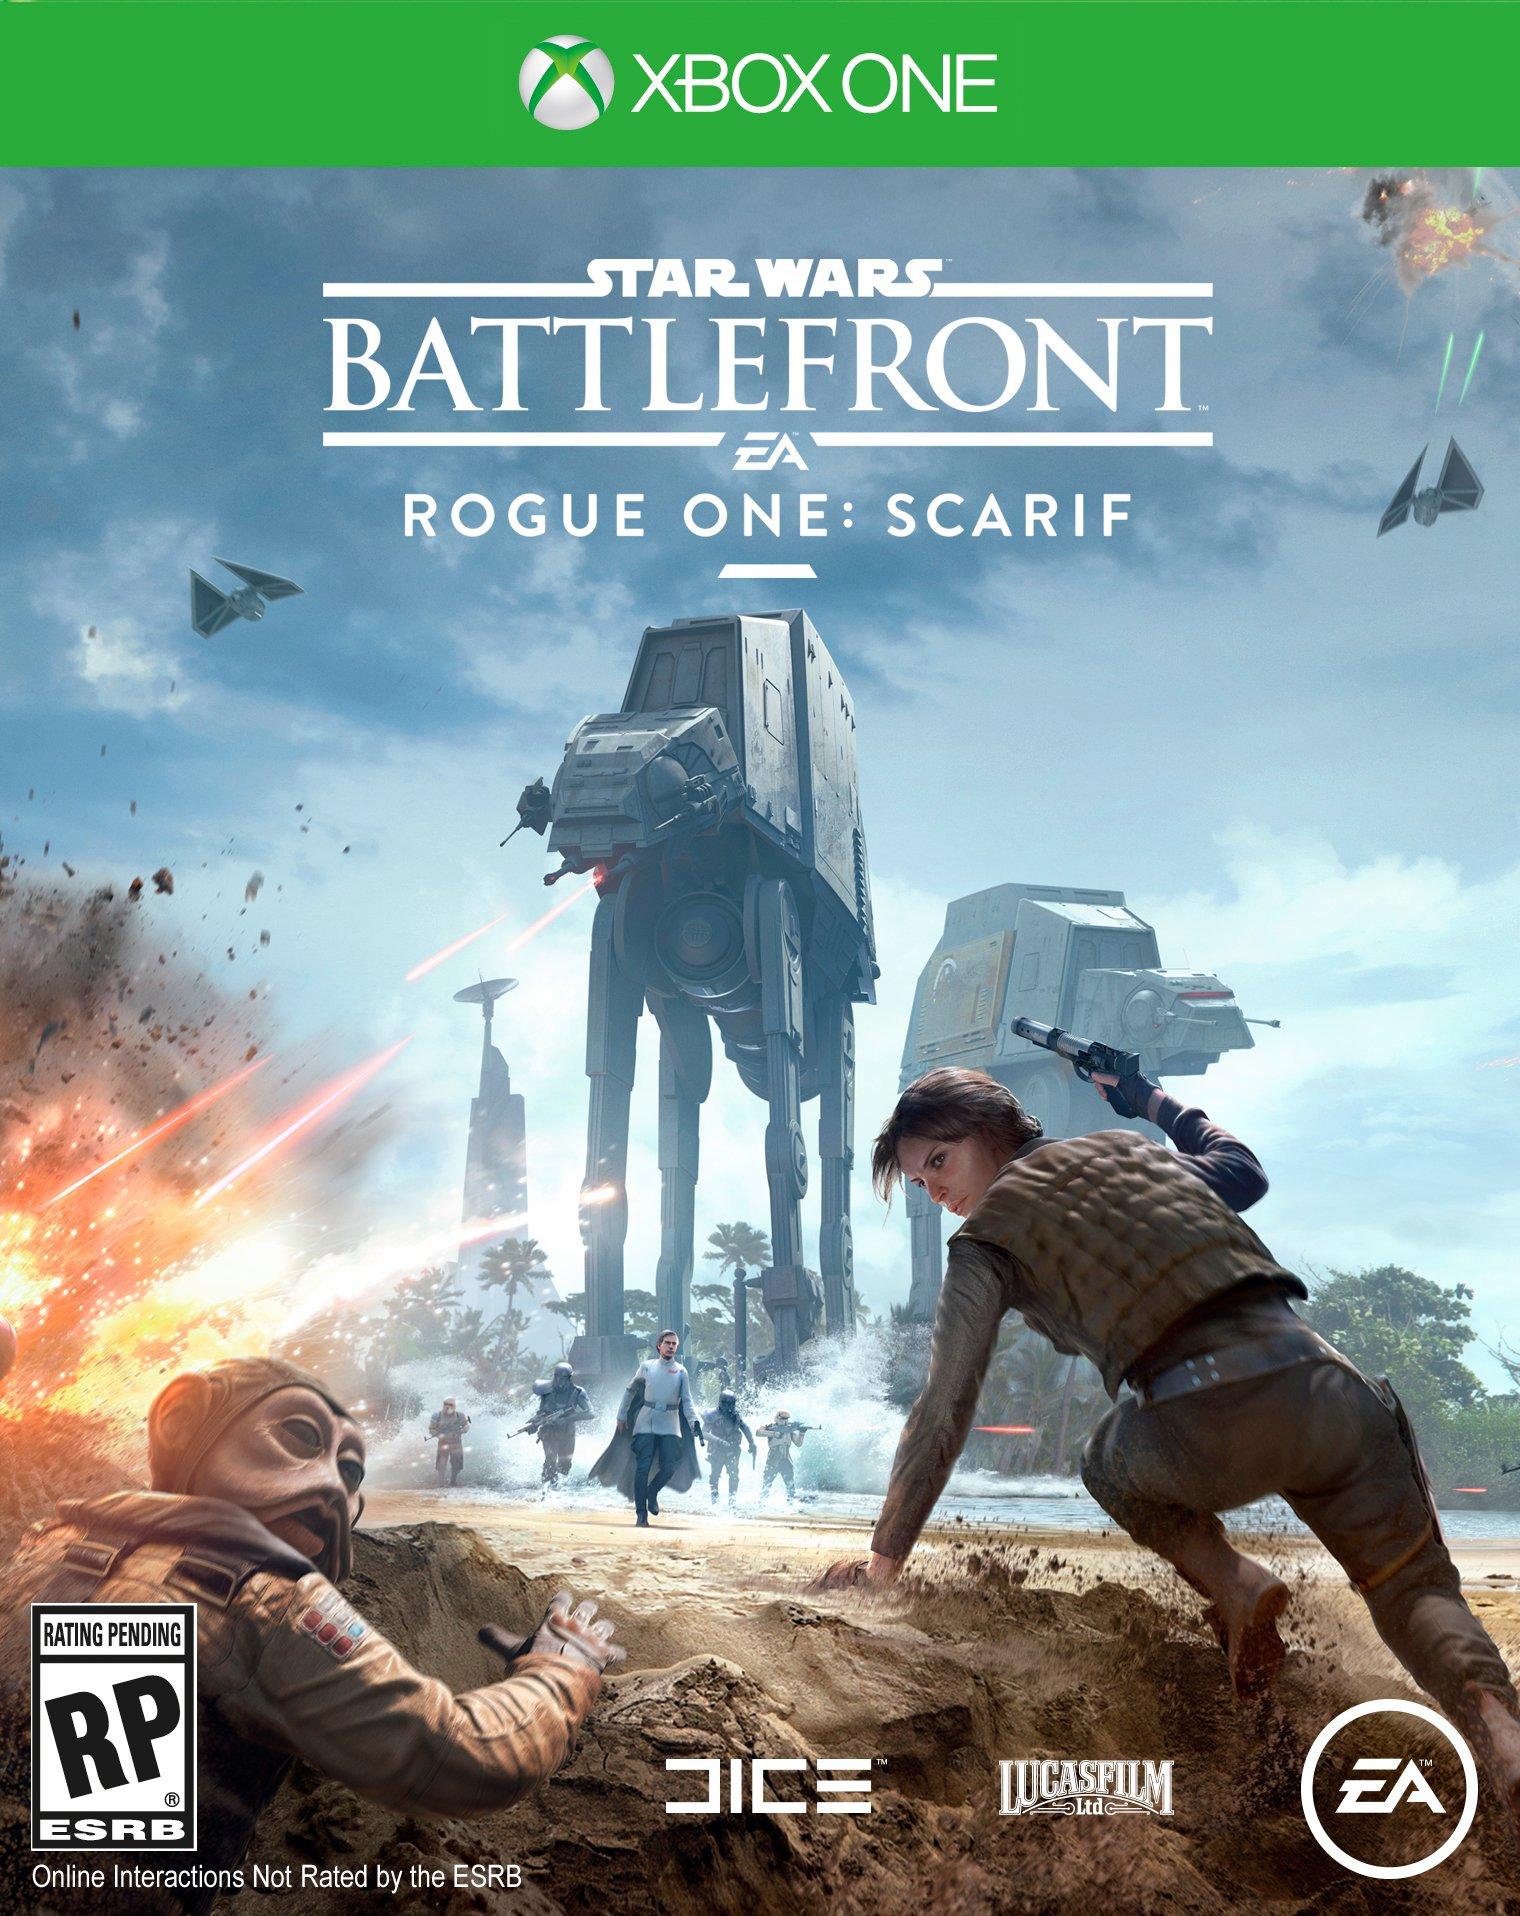 the new star wars game for xbox one